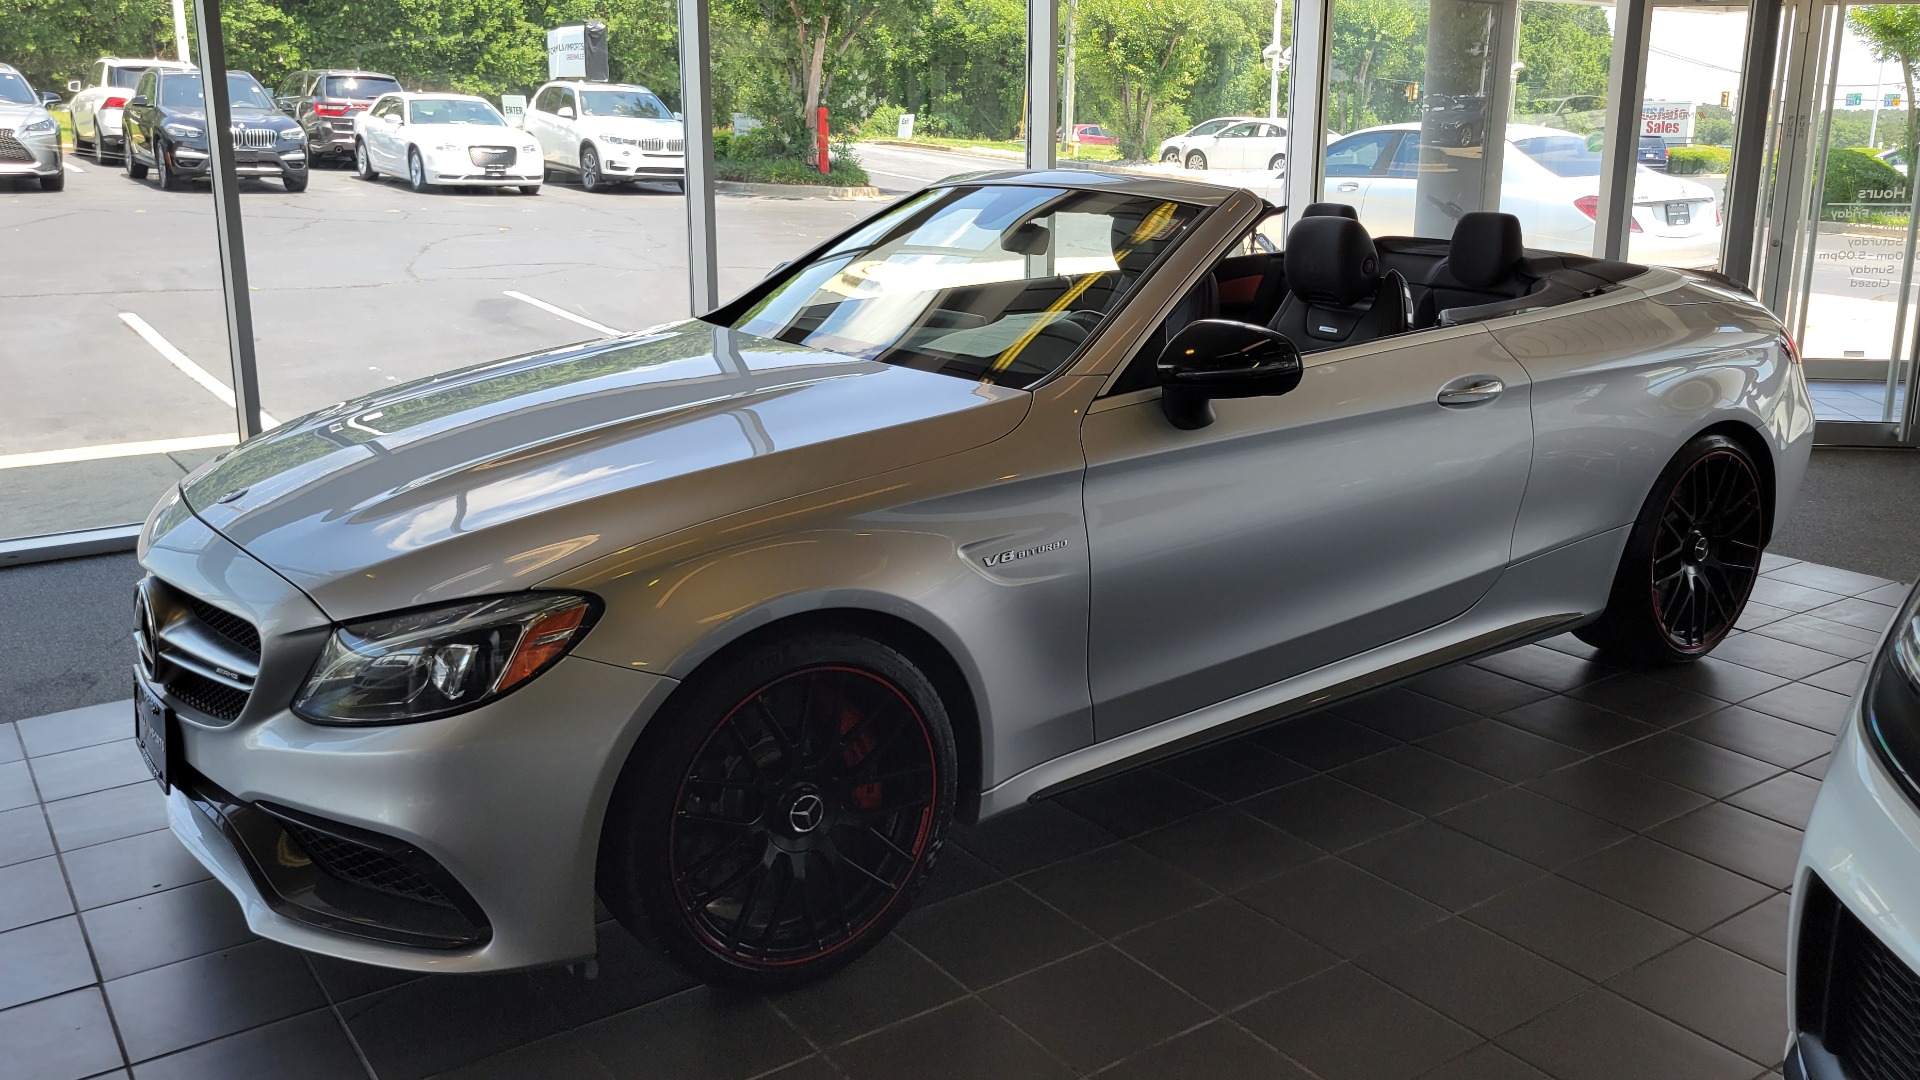 Used 2018 Mercedes-Benz C-CLASS AMG C 63 S CABRIOLET / 4.0L V8 / 7-SPD AUTO / PREMIUM / AMG PERF for sale $71,995 at Formula Imports in Charlotte NC 28227 2